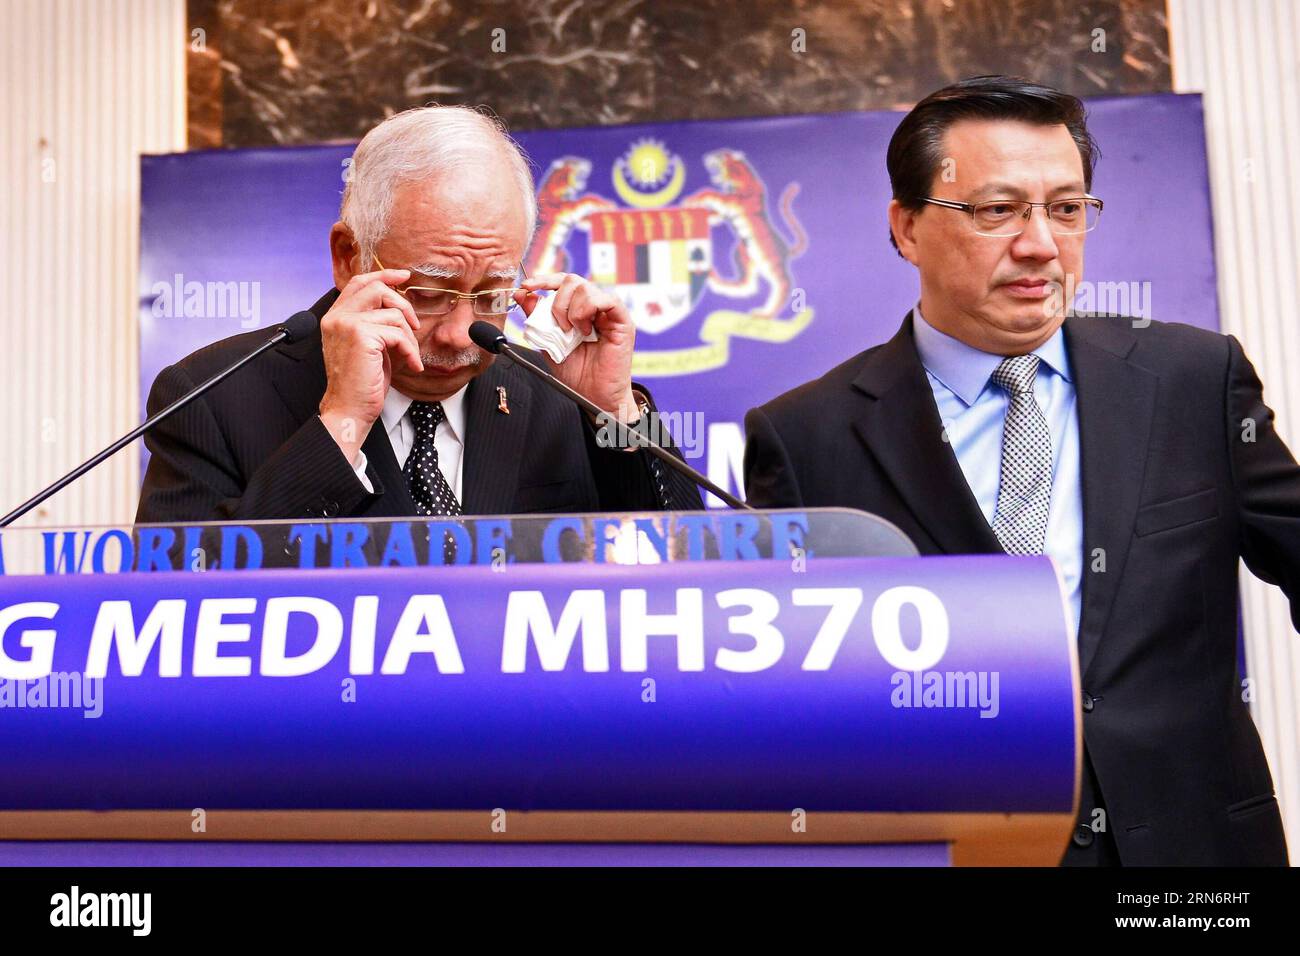 (150806) -- KUALA LUMPUR, Aug. 6, 2015 -- Malaysian Prime Minister Najib Razak (L) attends a press conference on the missing Malaysian Airlines flight MH370 in Kuala Lumpur, Malaysia, Aug. 6, 2015. Verification had confirmed that the debris discovered on the Reunion Island belongs to the missing Malaysian Airlines flight MH370, Malaysian Prime Minister Najib Razak announced here early on Thursday. ) MALAYSIA-KUALA LUMPUR-PM-MH 370 FLIGHT-PRESS CONFERENCE ChongxVoonxChung PUBLICATIONxNOTxINxCHN   Kuala Lumpur Aug 6 2015 Malaysian Prime Ministers Najib Razak l Attends a Press Conference ON The M Stock Photo